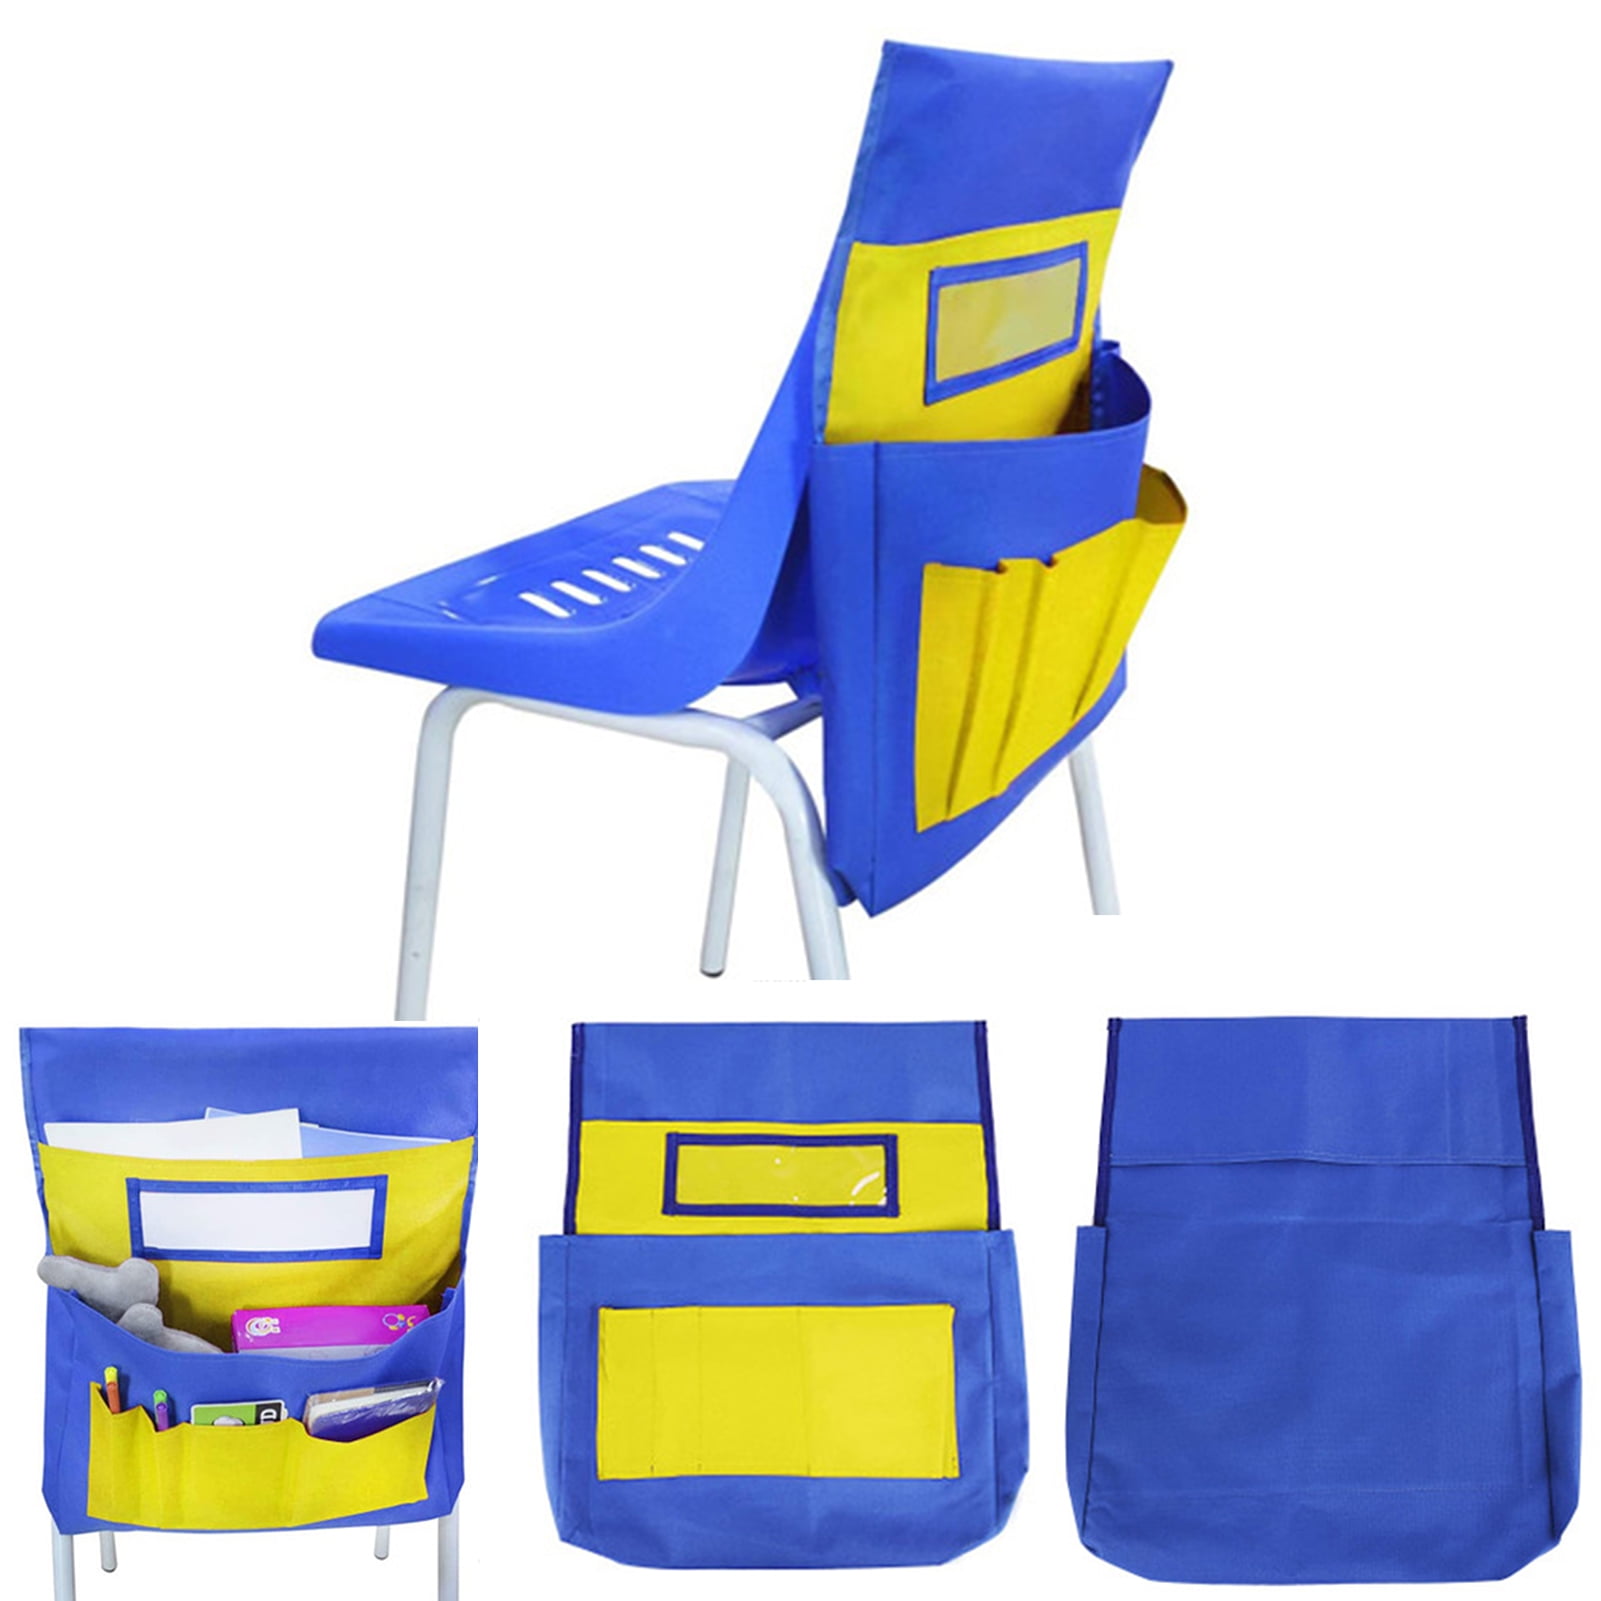 Kids Classroom Chair Pockets Chair Back Organizer Bag with Name Tag Slot Seatback Companion Stuff Storage Bag for School Students Daycare Chairback Seat Sack